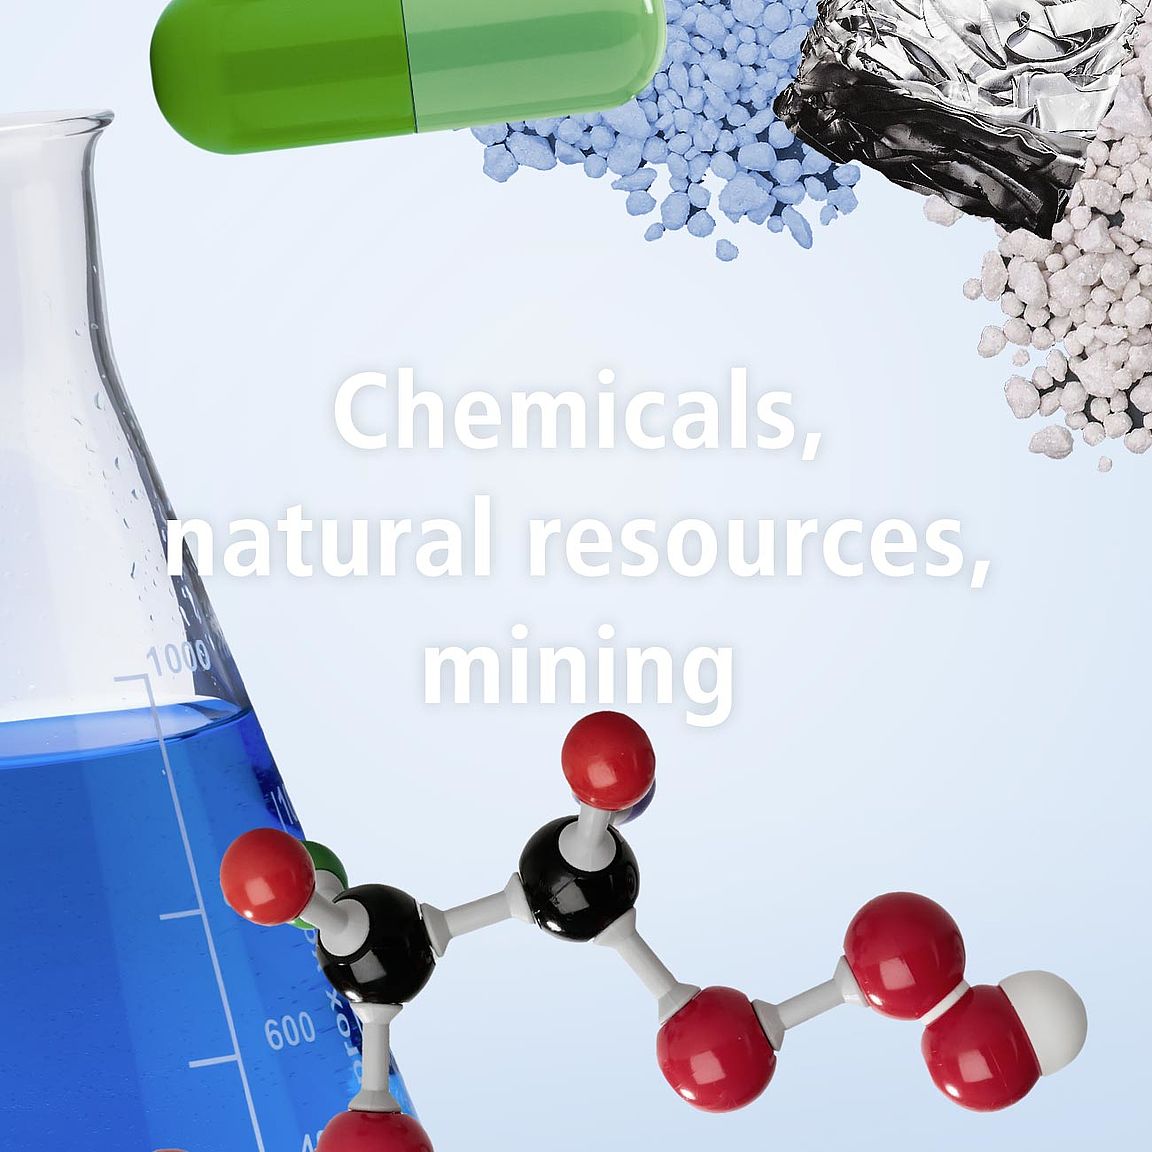 Chemicals, natural resources, mining